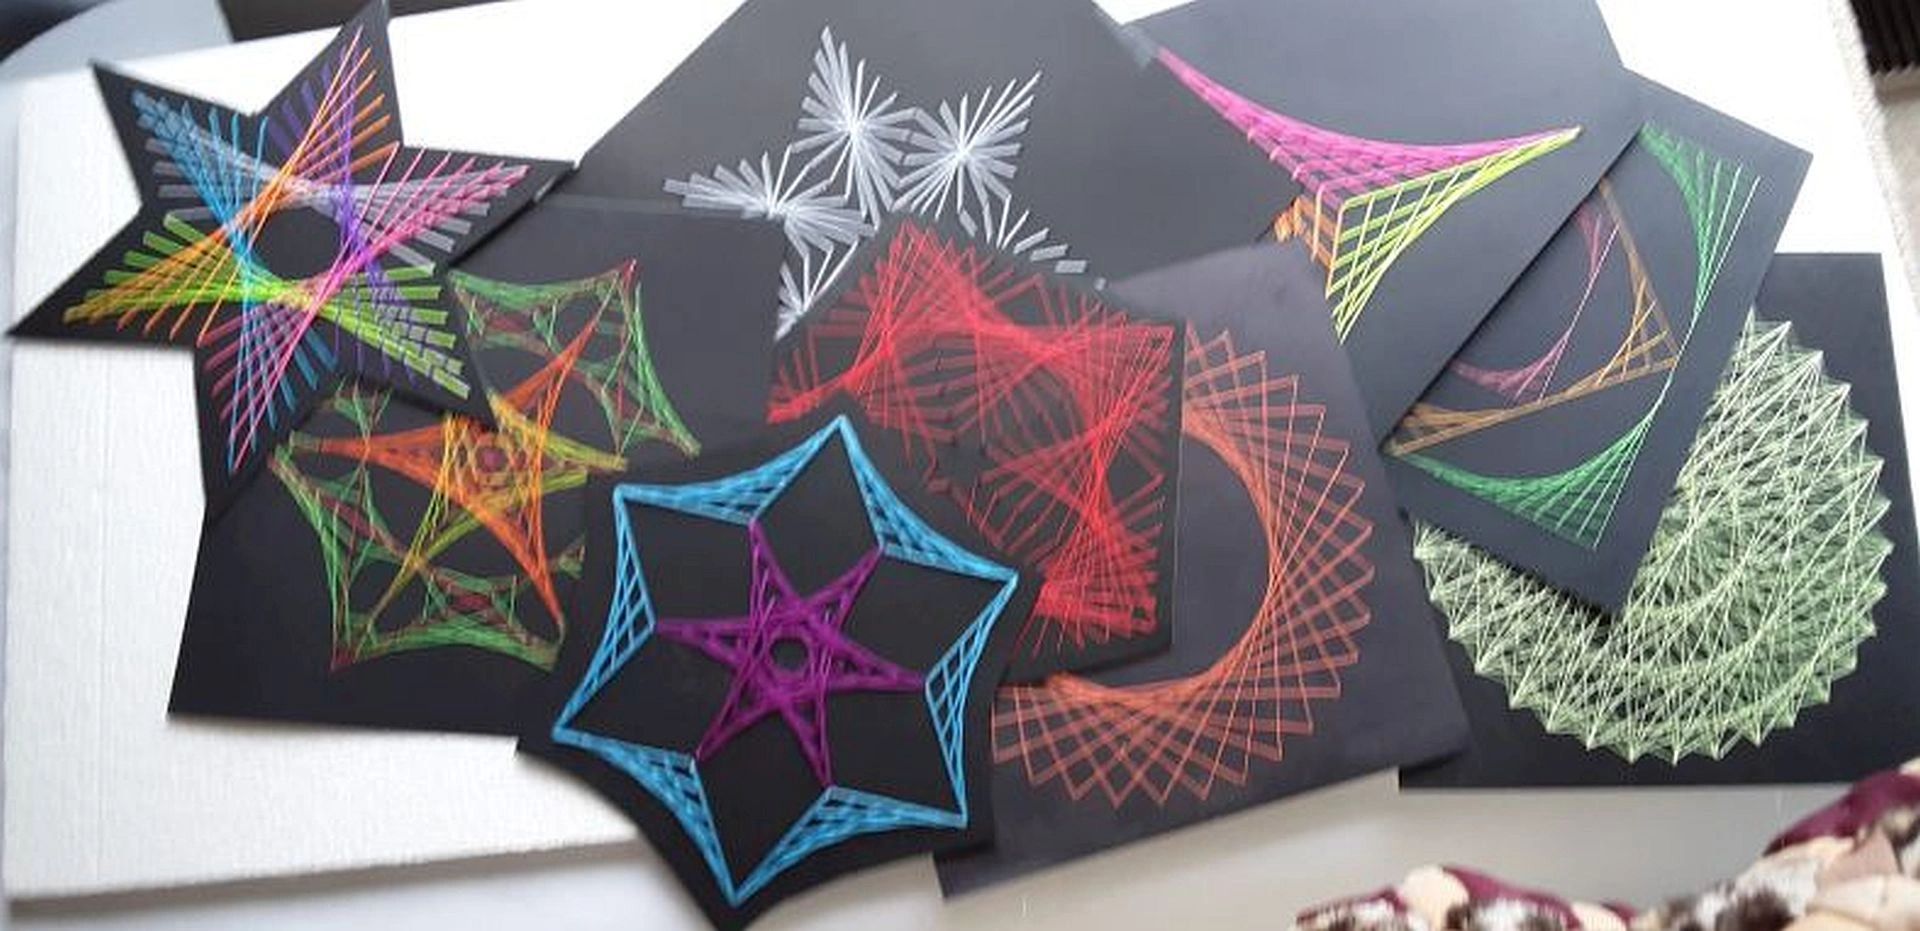 Examples of string art designs you can sew  using The String Art People directions and materials.